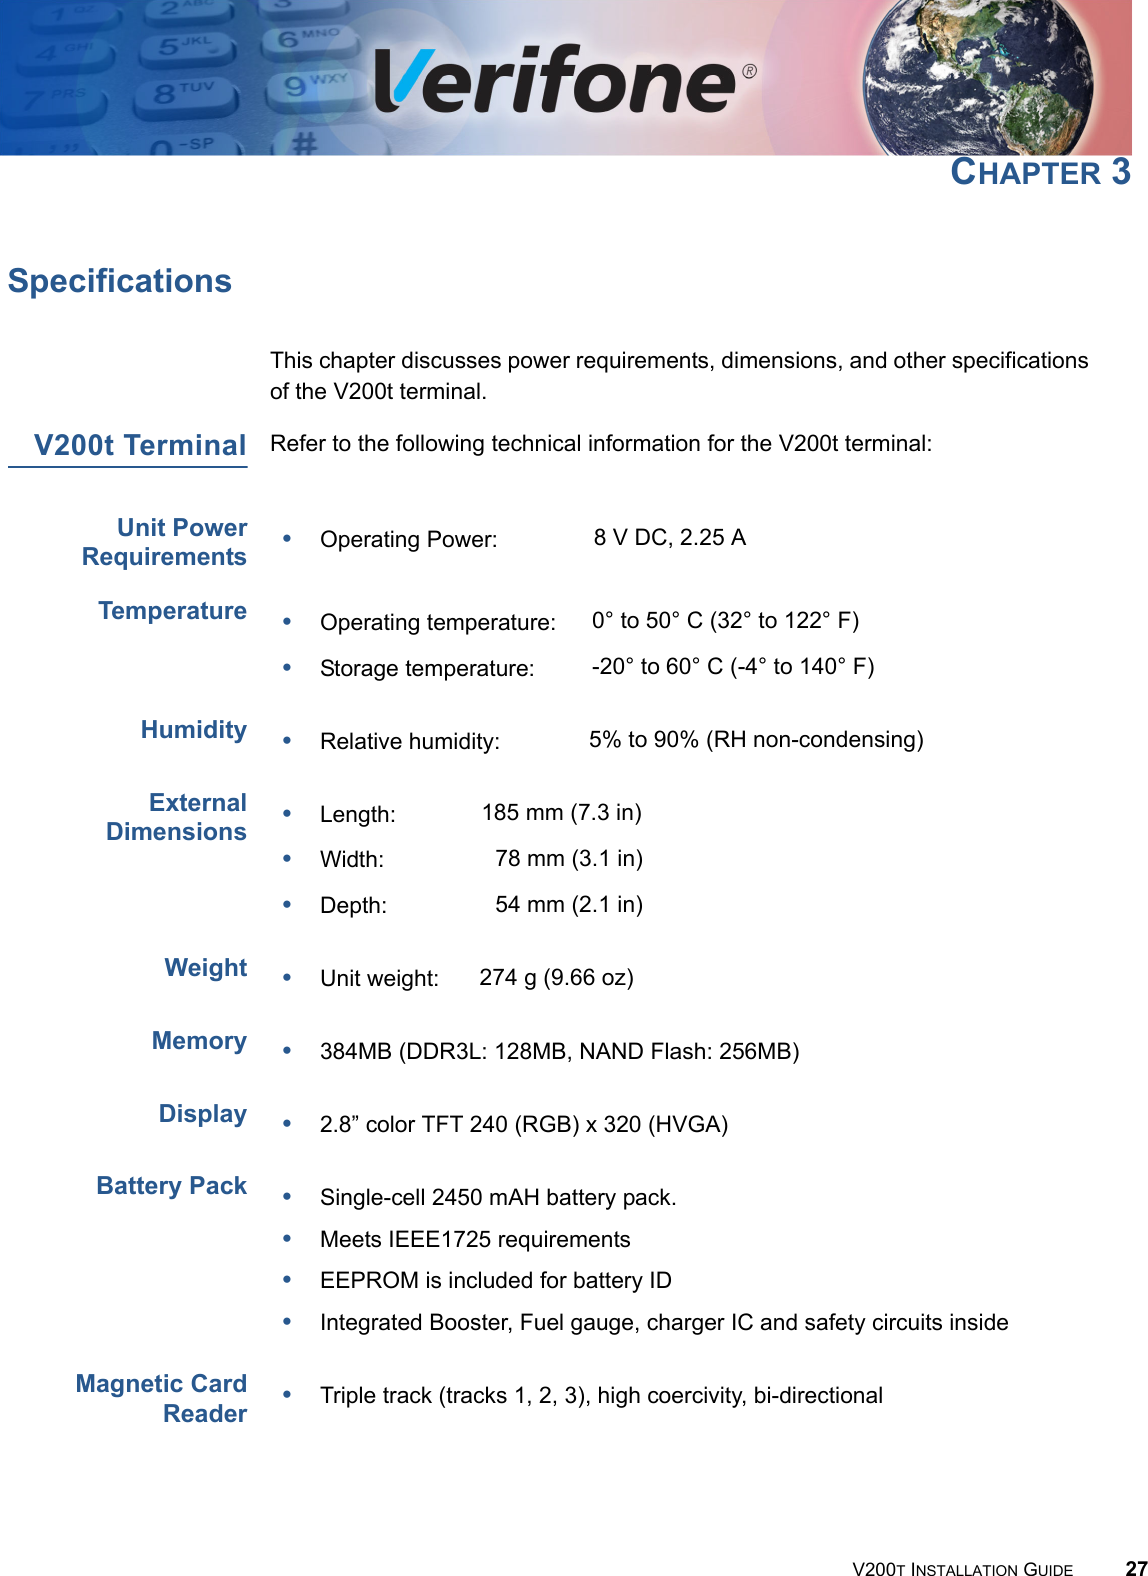 V200T INSTALLATION GUIDE 27CHAPTER 3SpecificationsThis chapter discusses power requirements, dimensions, and other specifications of the V200t terminal.V200t Terminal Refer to the following technical information for the V200t terminal:Unit PowerRequirementsTemperatureHumidityExternalDimensionsWeightMemoryDisplayBattery PackMagnetic CardReader•Operating Power: 8 V DC, 2.25 A•Operating temperature: 0° to 50° C (32° to 122° F) •Storage temperature: -20° to 60° C (-4° to 140° F)•Relative humidity: 5% to 90% (RH non-condensing)•Length: 185 mm (7.3 in)•Width: 78 mm (3.1 in)•Depth: 54 mm (2.1 in)•Unit weight: 274 g (9.66 oz)•384MB (DDR3L: 128MB, NAND Flash: 256MB)•2.8” color TFT 240 (RGB) x 320 (HVGA)•Single-cell 2450 mAH battery pack.•Meets IEEE1725 requirements•EEPROM is included for battery ID•Integrated Booster, Fuel gauge, charger IC and safety circuits inside •Triple track (tracks 1, 2, 3), high coercivity, bi-directional